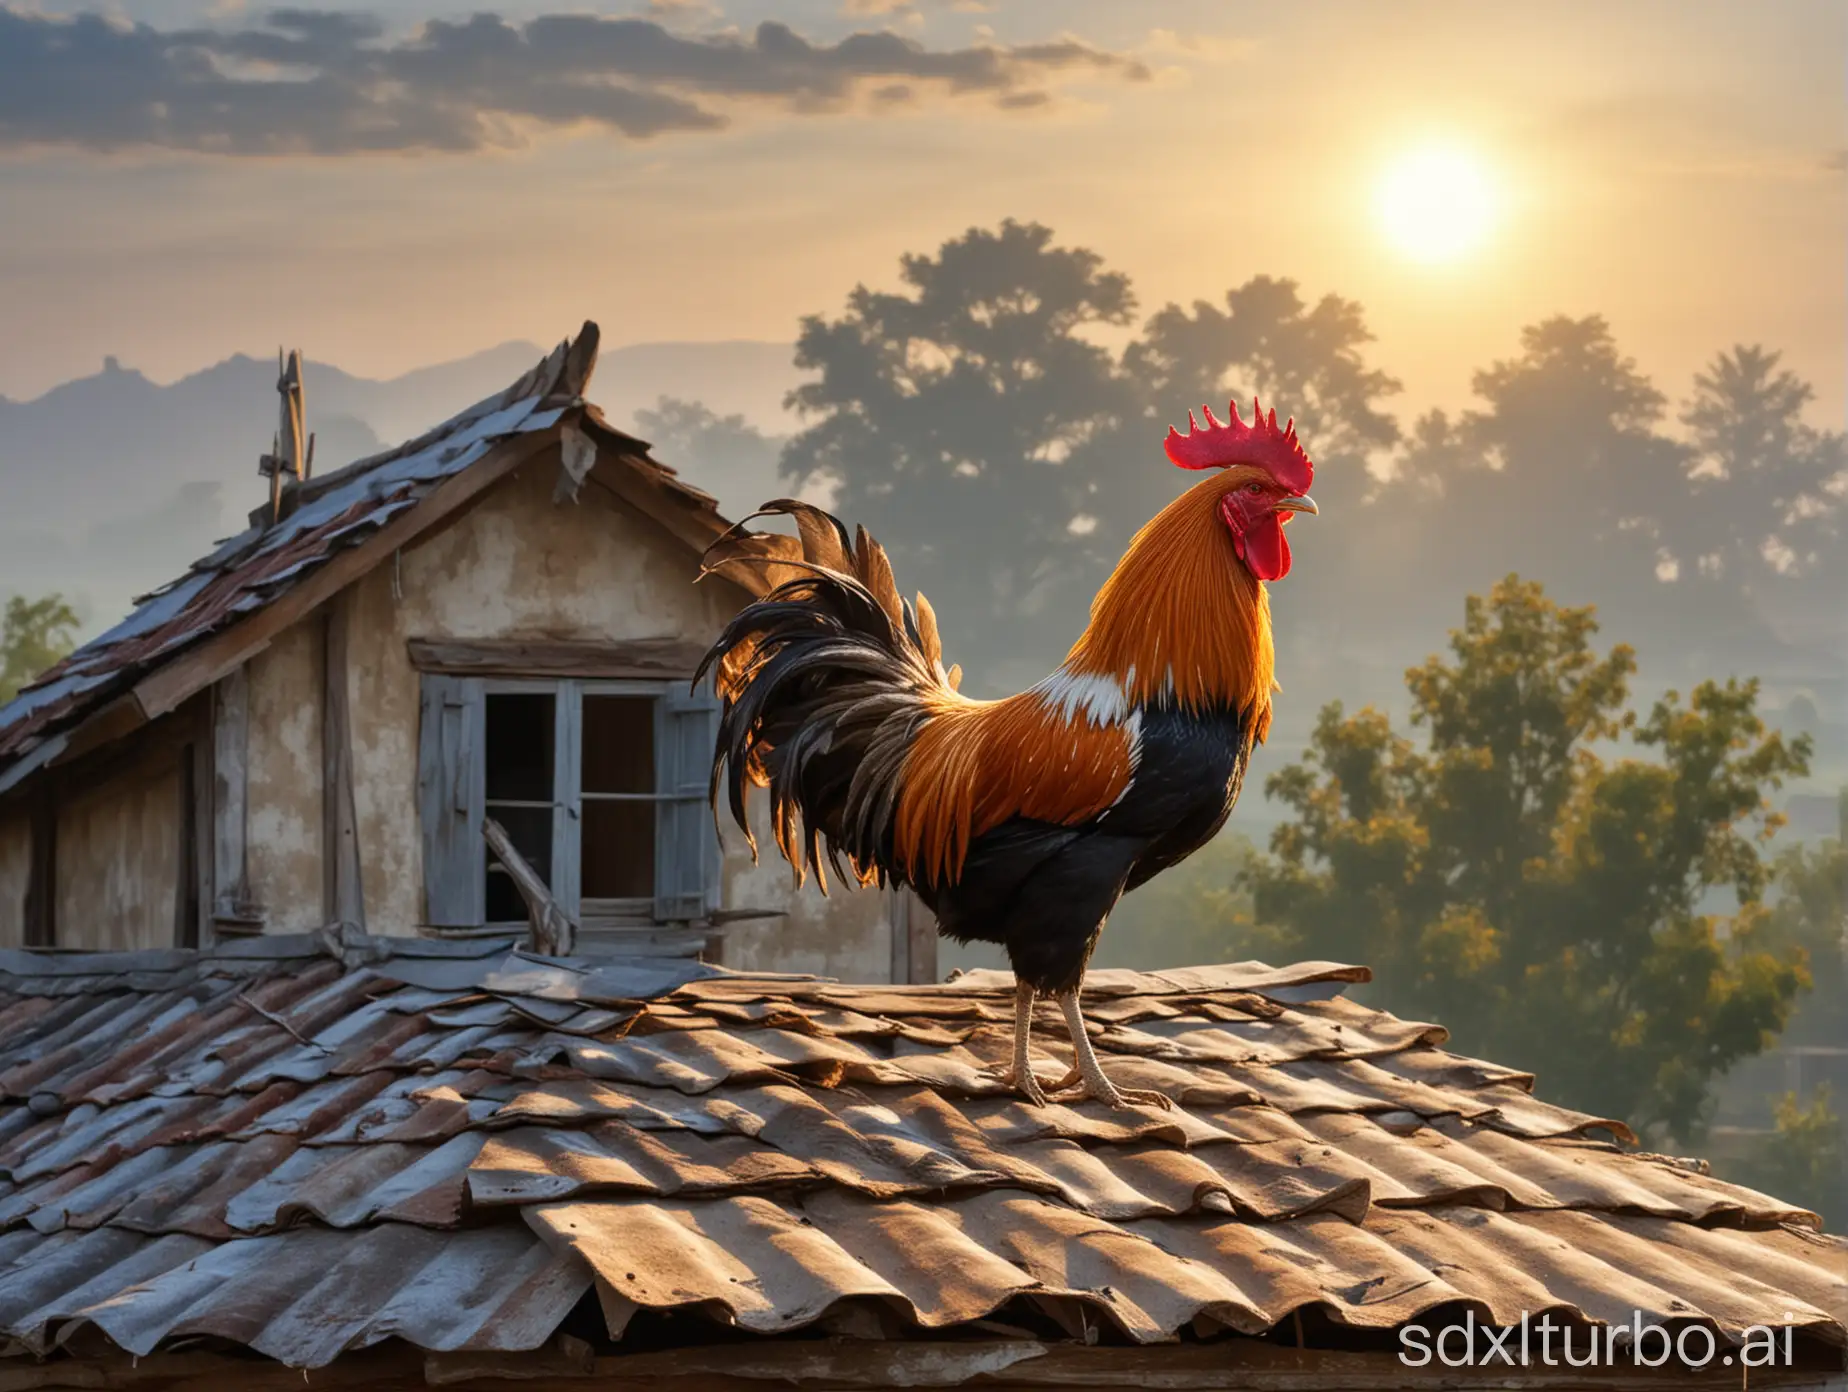 Rooster-Crowing-on-Rustic-House-Roof-at-Sunrise